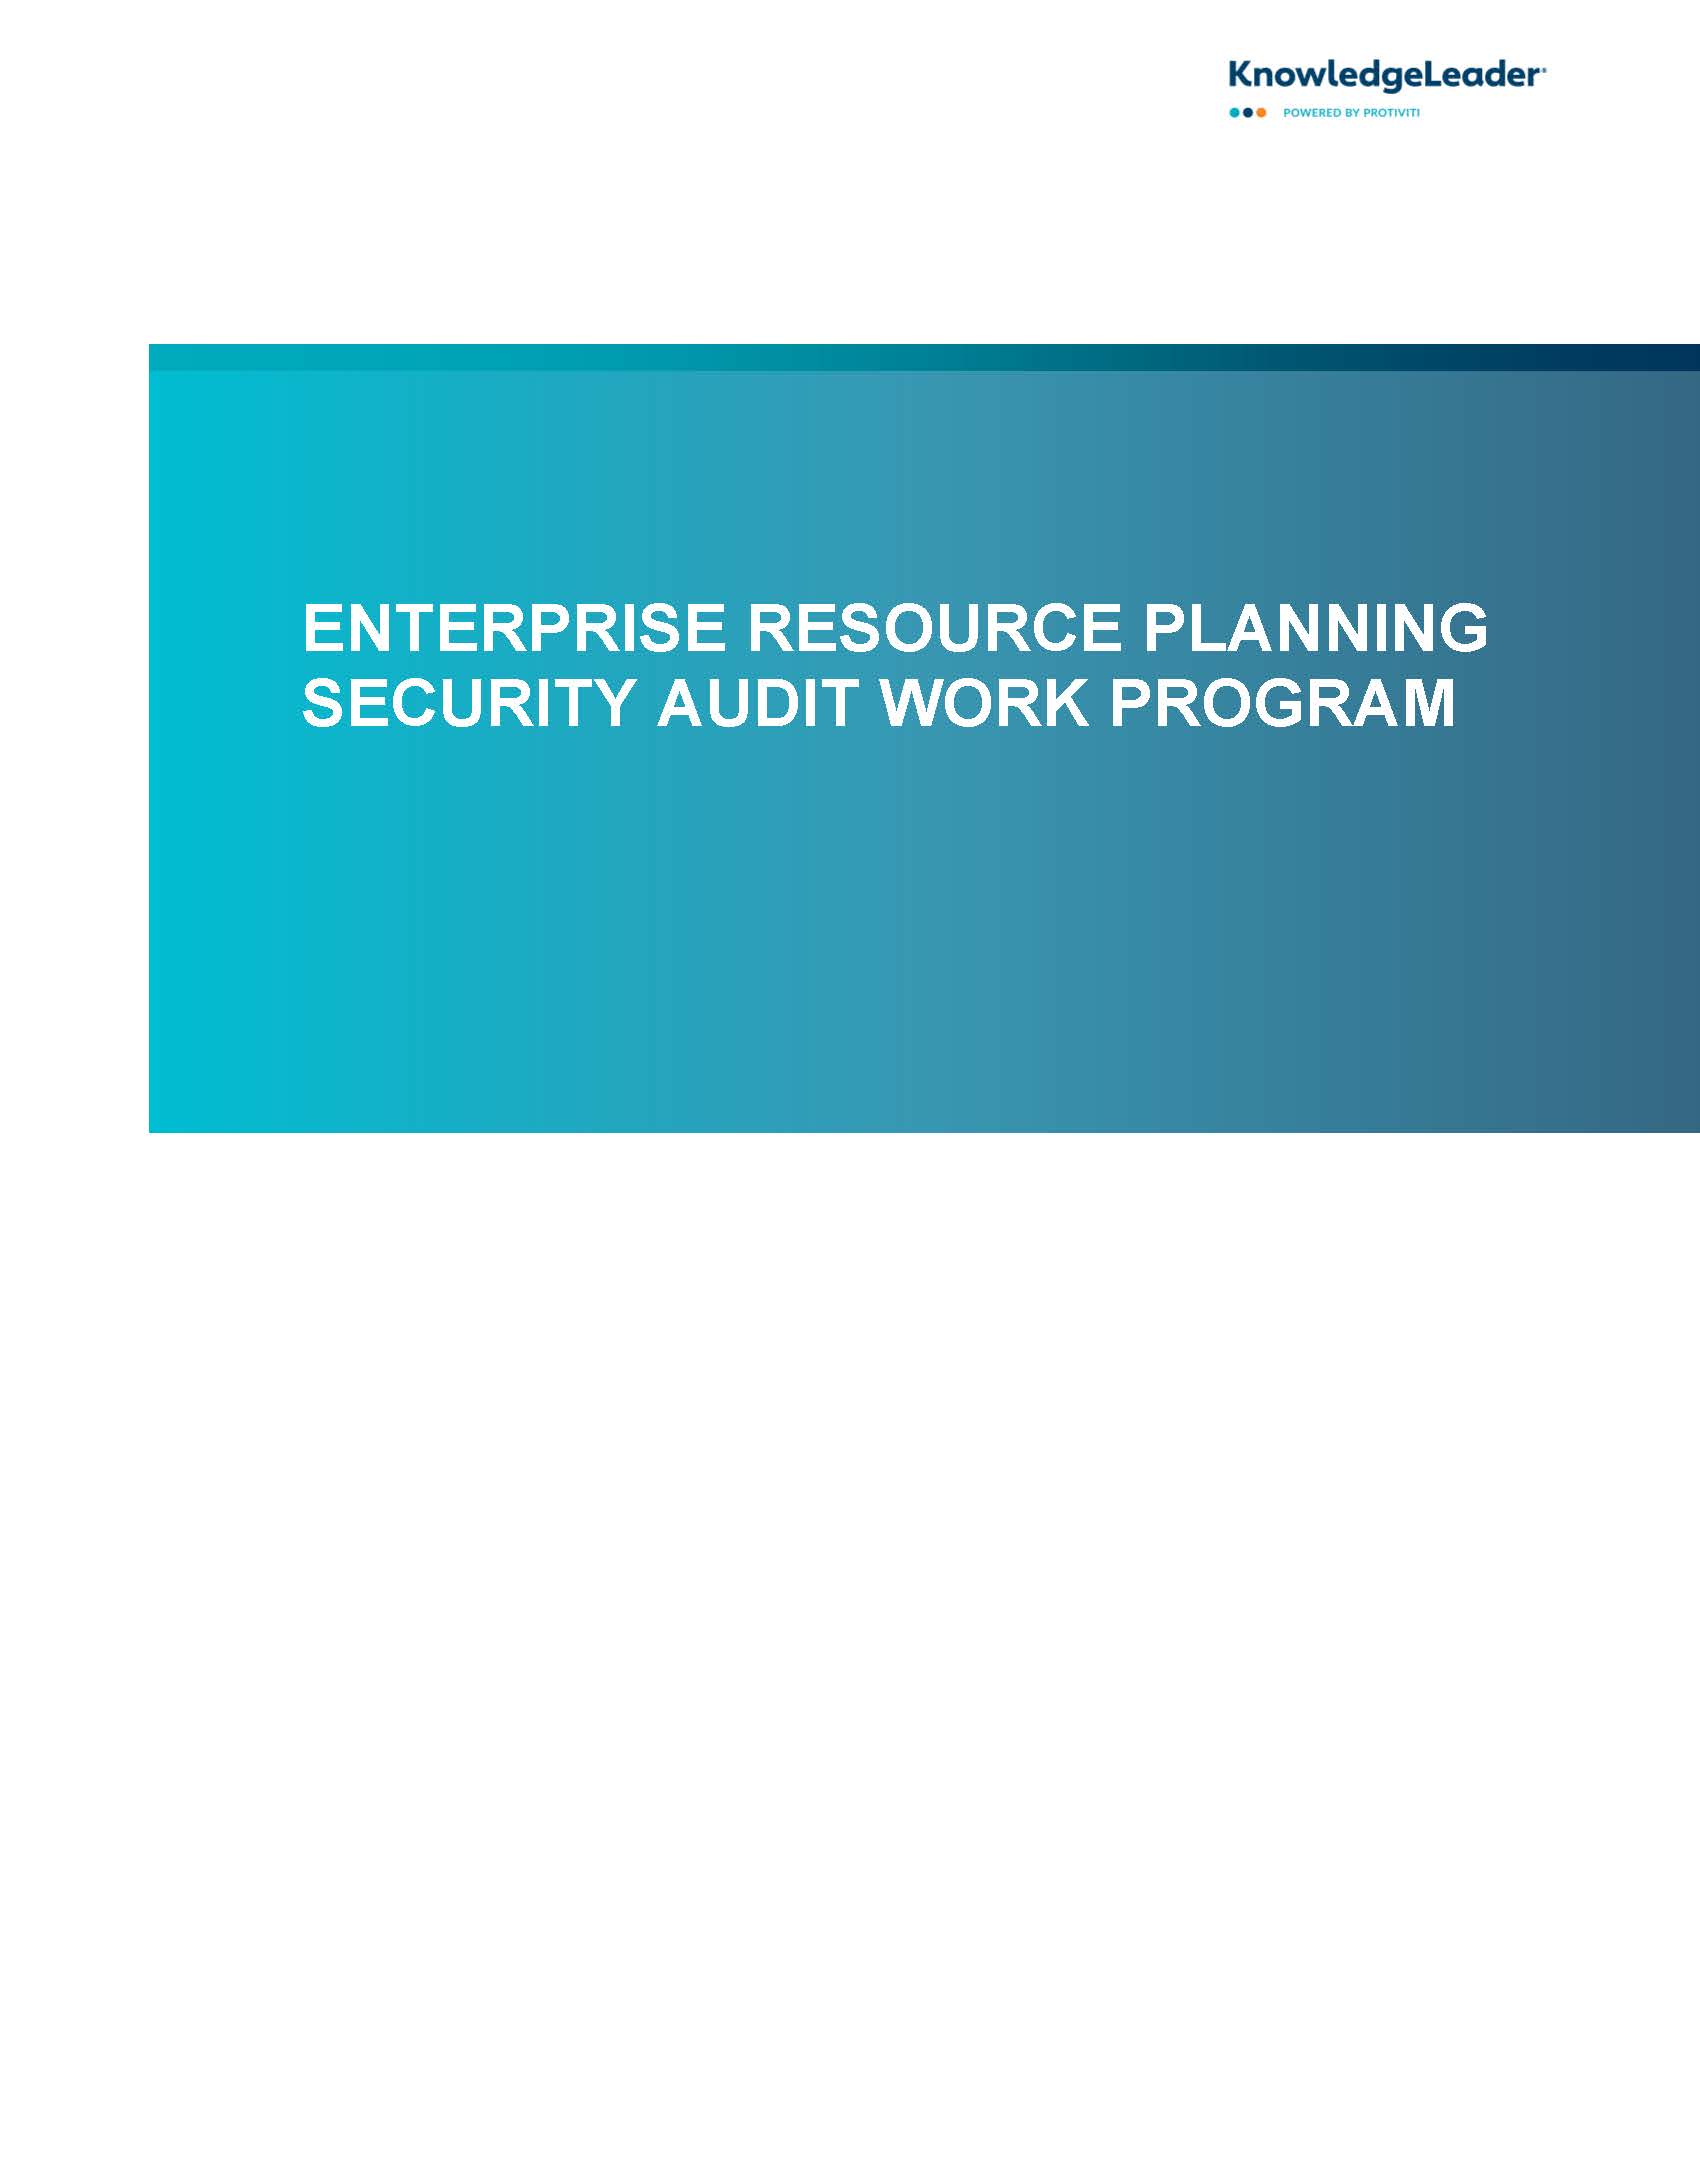 Screenshot of the first page of Enterprise Resource Planning Security Audit Work Program